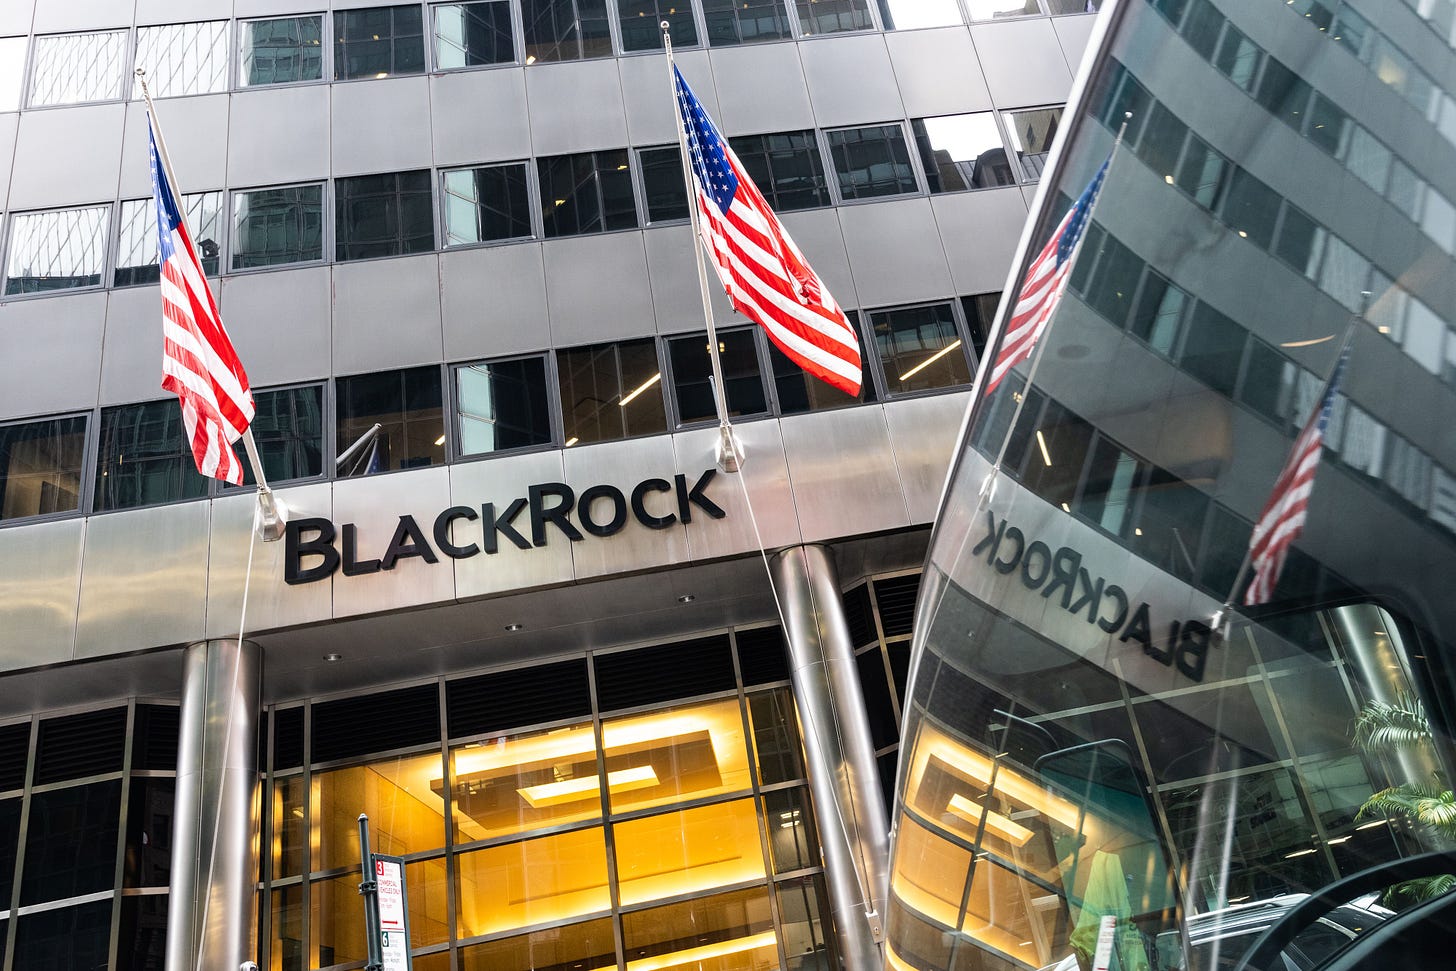 BlackRock Planning to Offer Crypto Trading, Sources Say